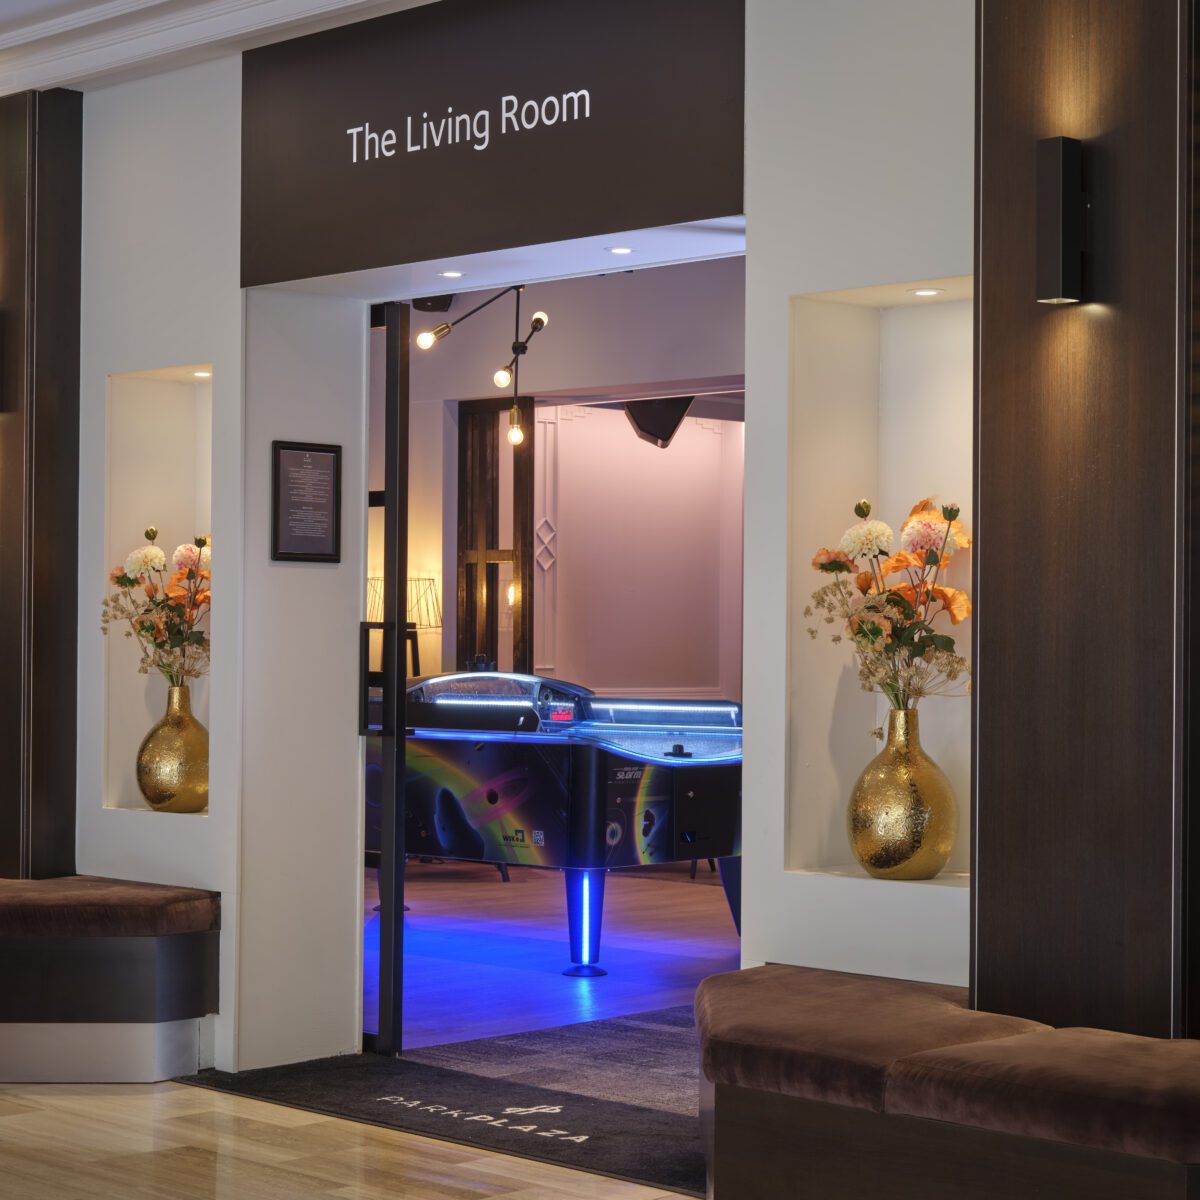 Park Plaza Eindhoven The Living Room entrance and air hockey table